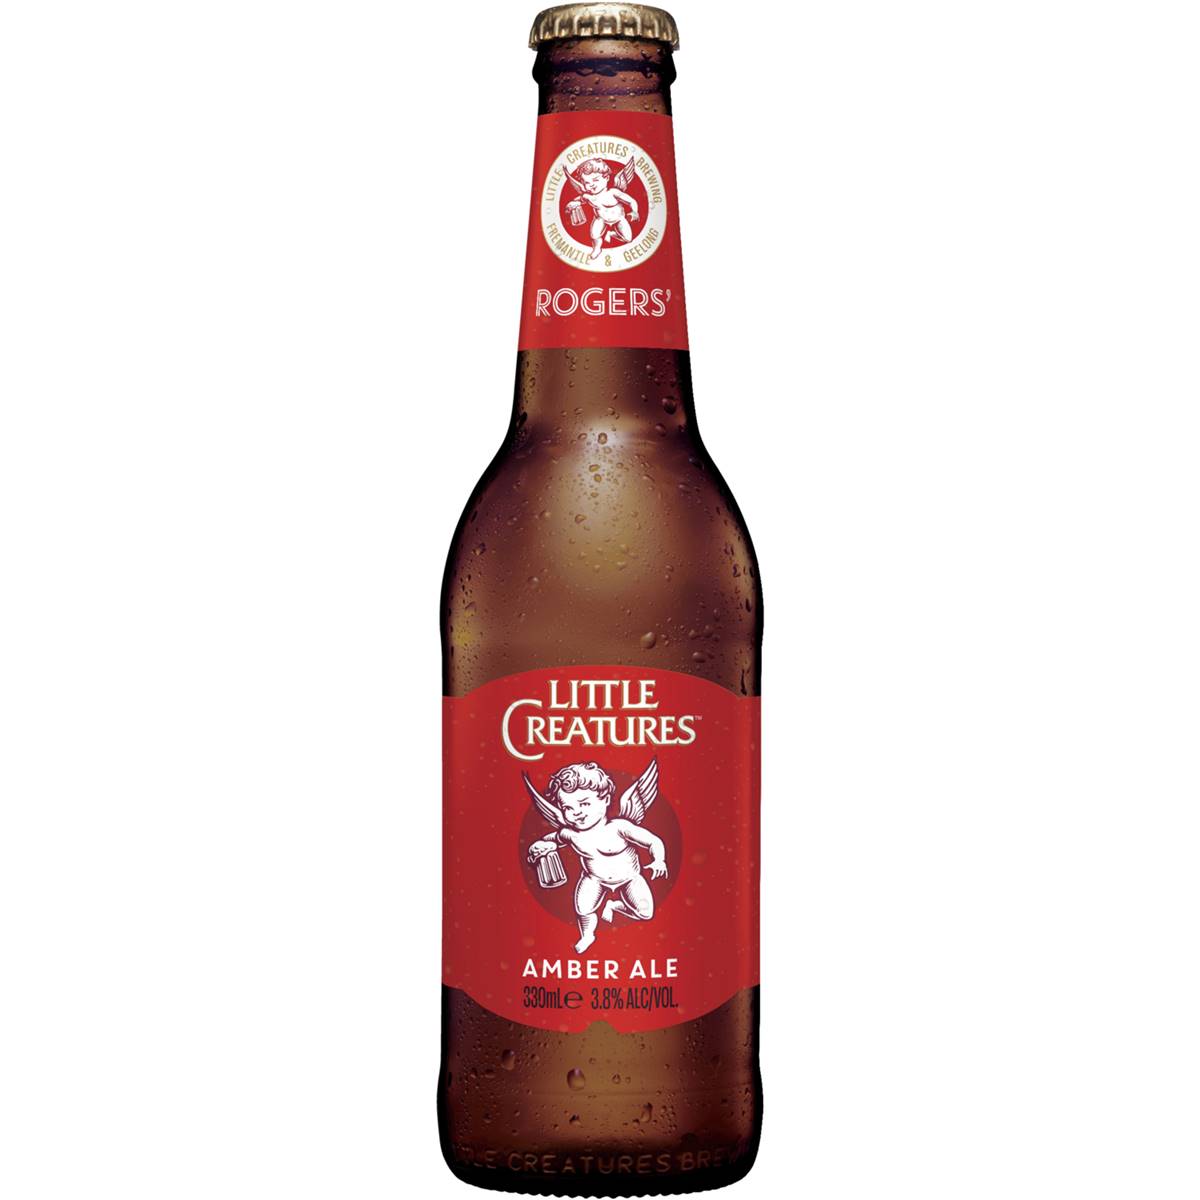 Calories in Little Creatures Rogers Amber Ale Bottle